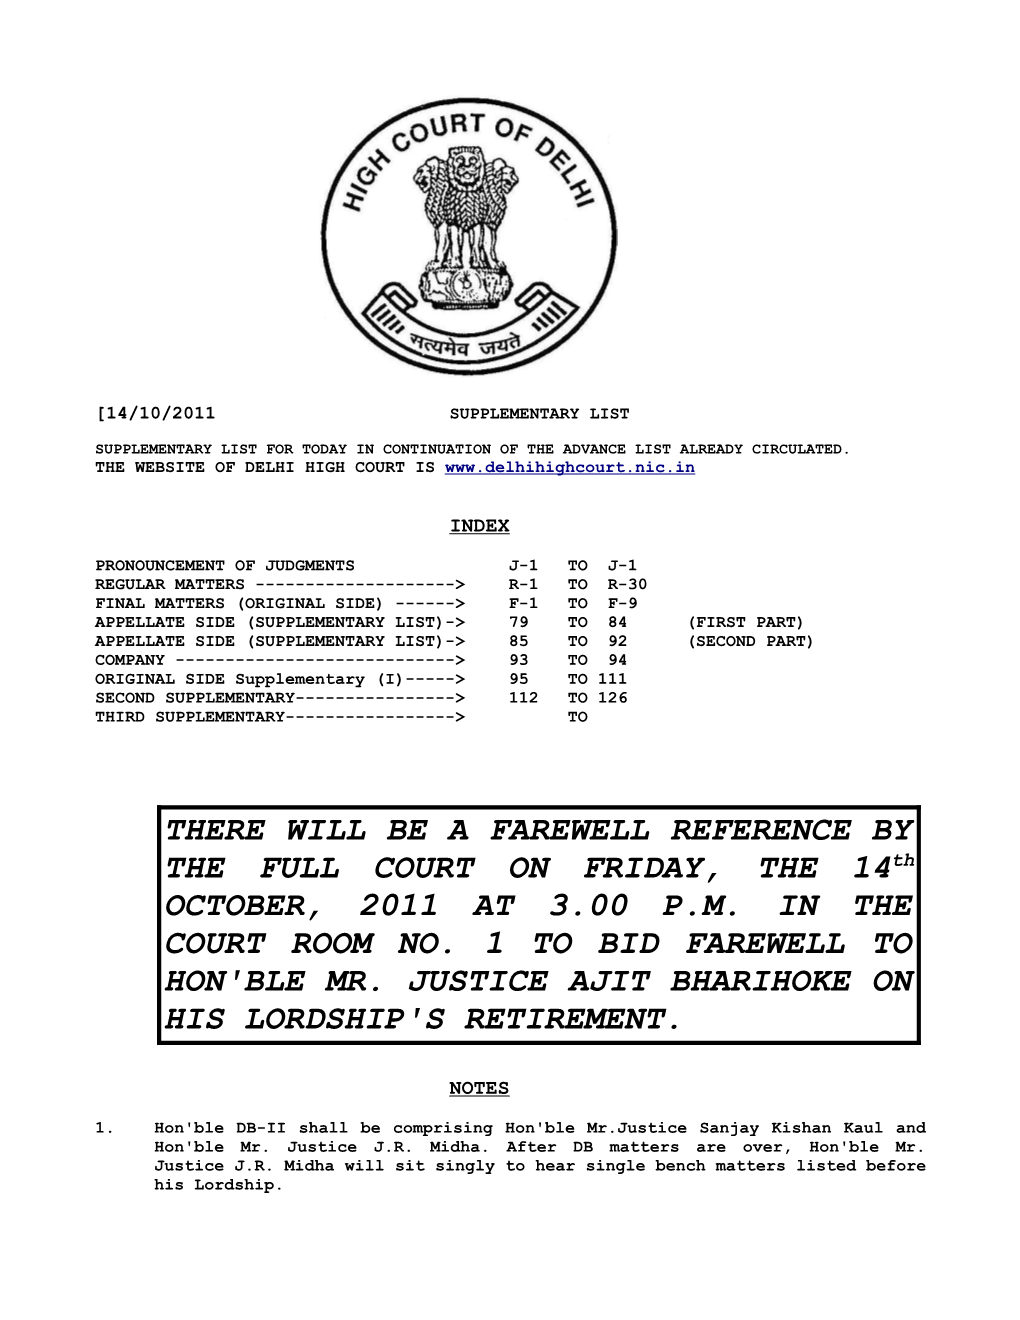 THERE WILL BE a FAREWELL REFERENCE by the FULL COURT on FRIDAY, the 14Th OCTOBER, 2011 at 3.00 P.M. in the COURT ROOM NO. 1 to BID FAREWELL to HON'ble MR